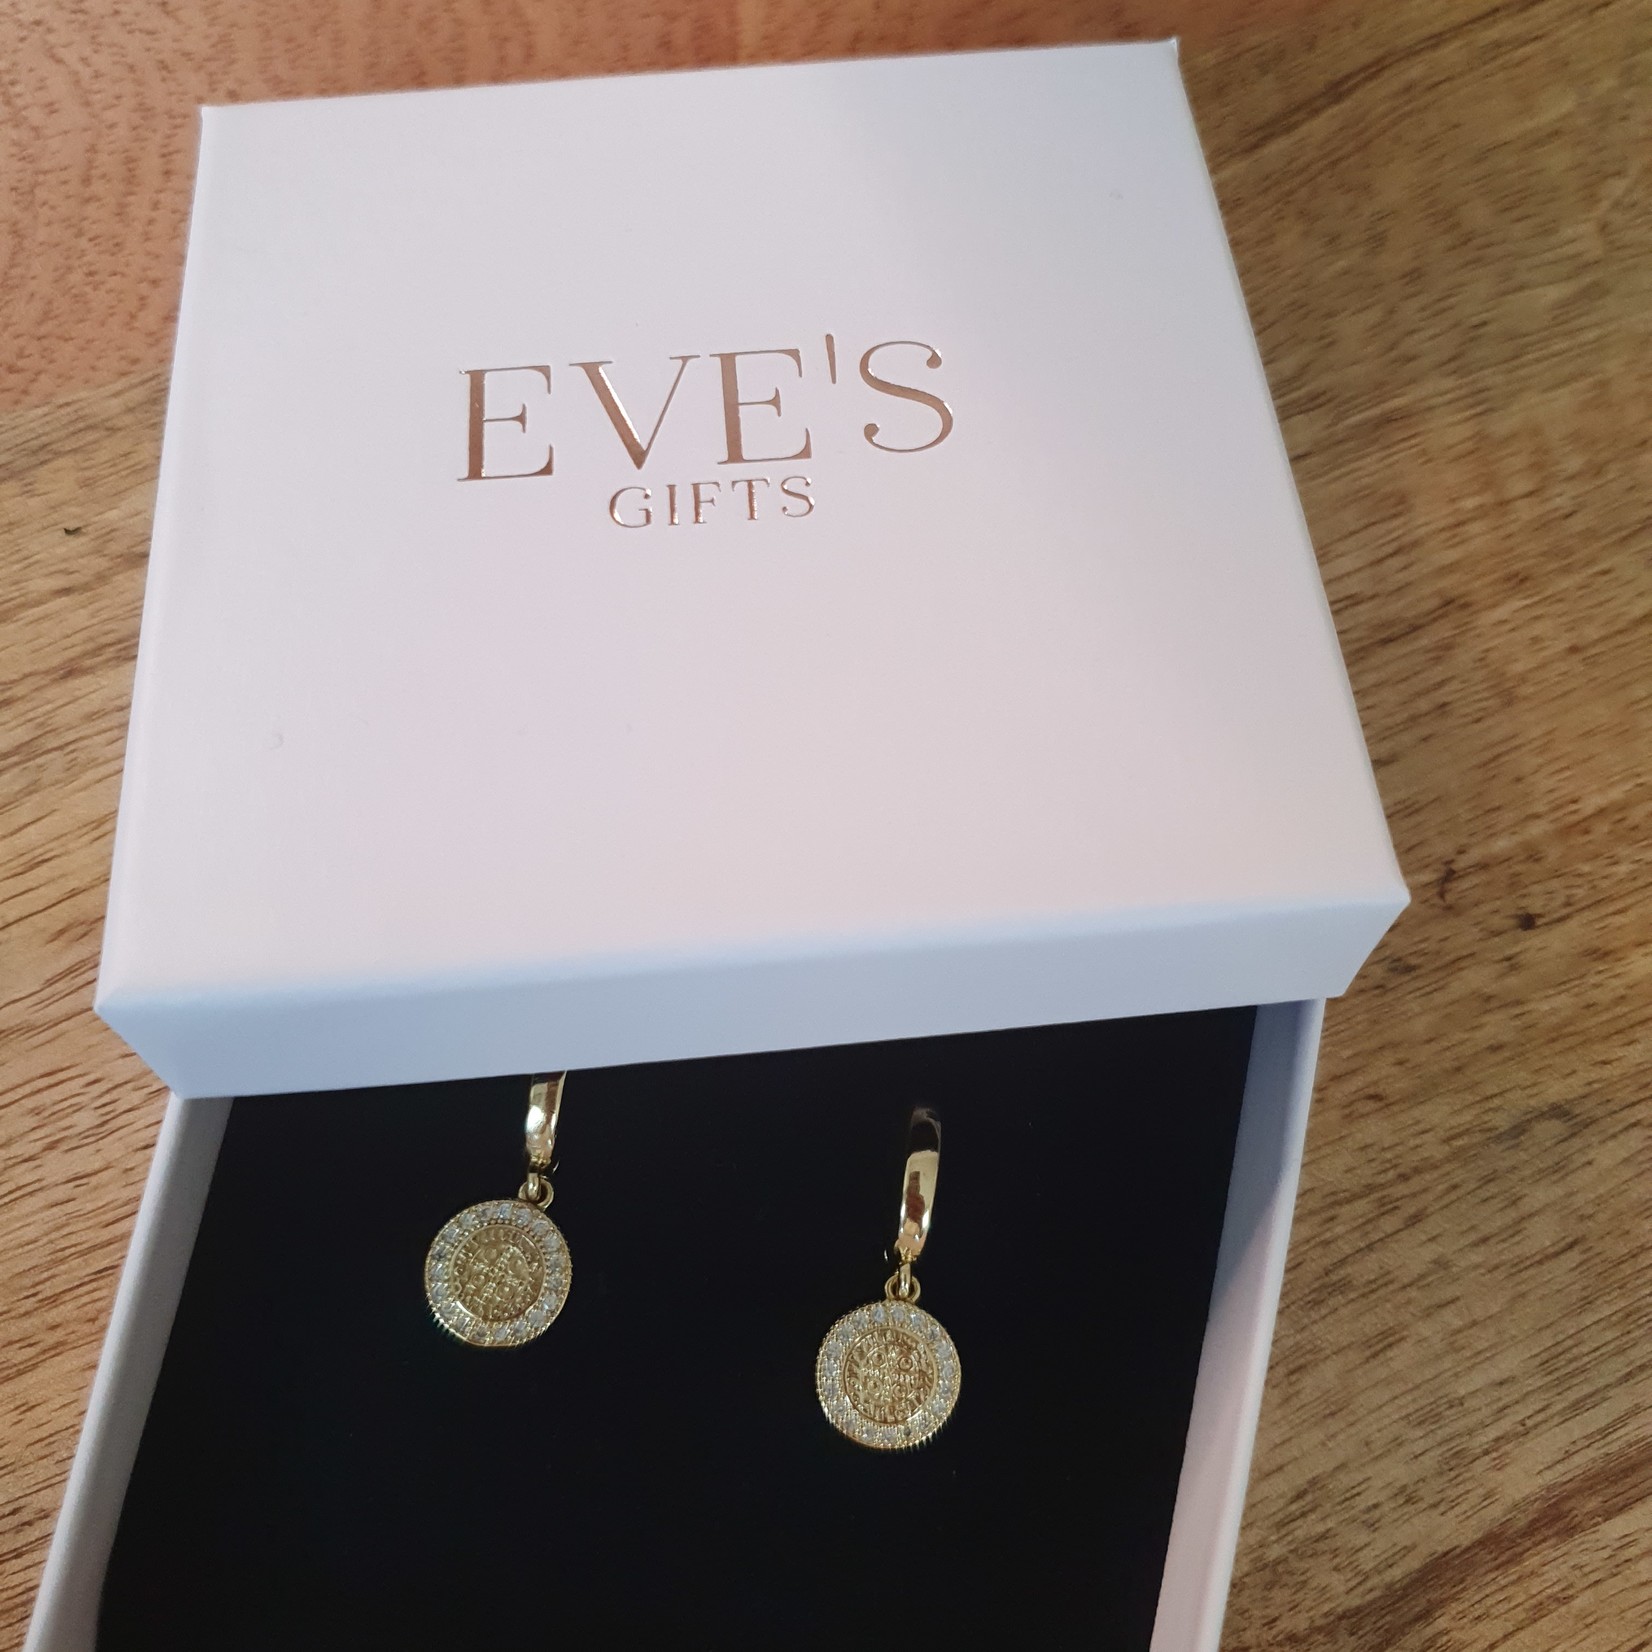 Eve's Gifts Gift box luxury soap and gold plated earrings